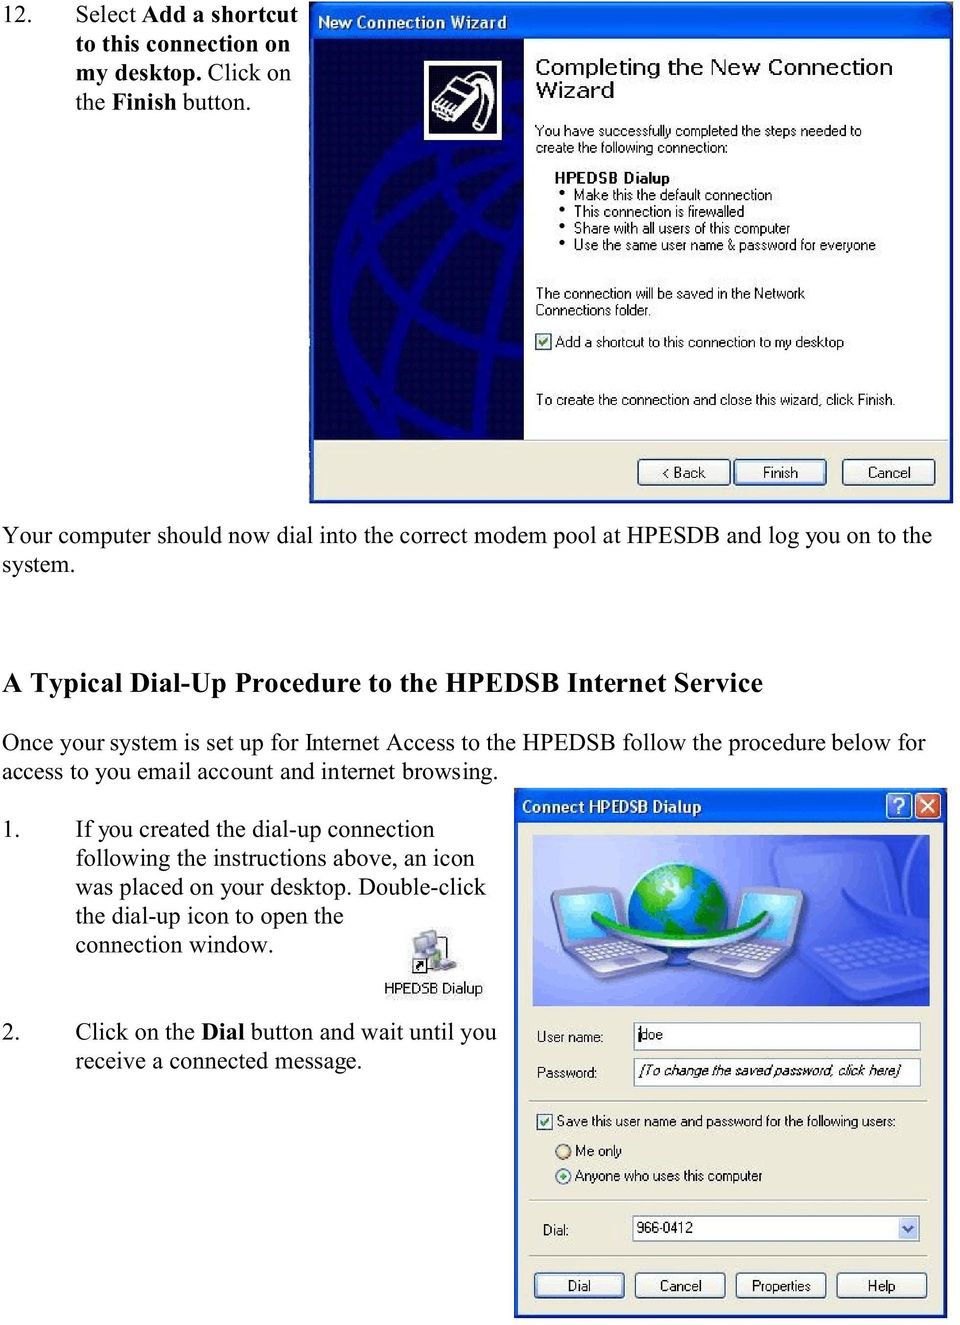 A Typical Dial-Up Procedure to the HPEDSB Internet Service Once your system is set up for Internet Access to the HPEDSB follow the procedure below for access